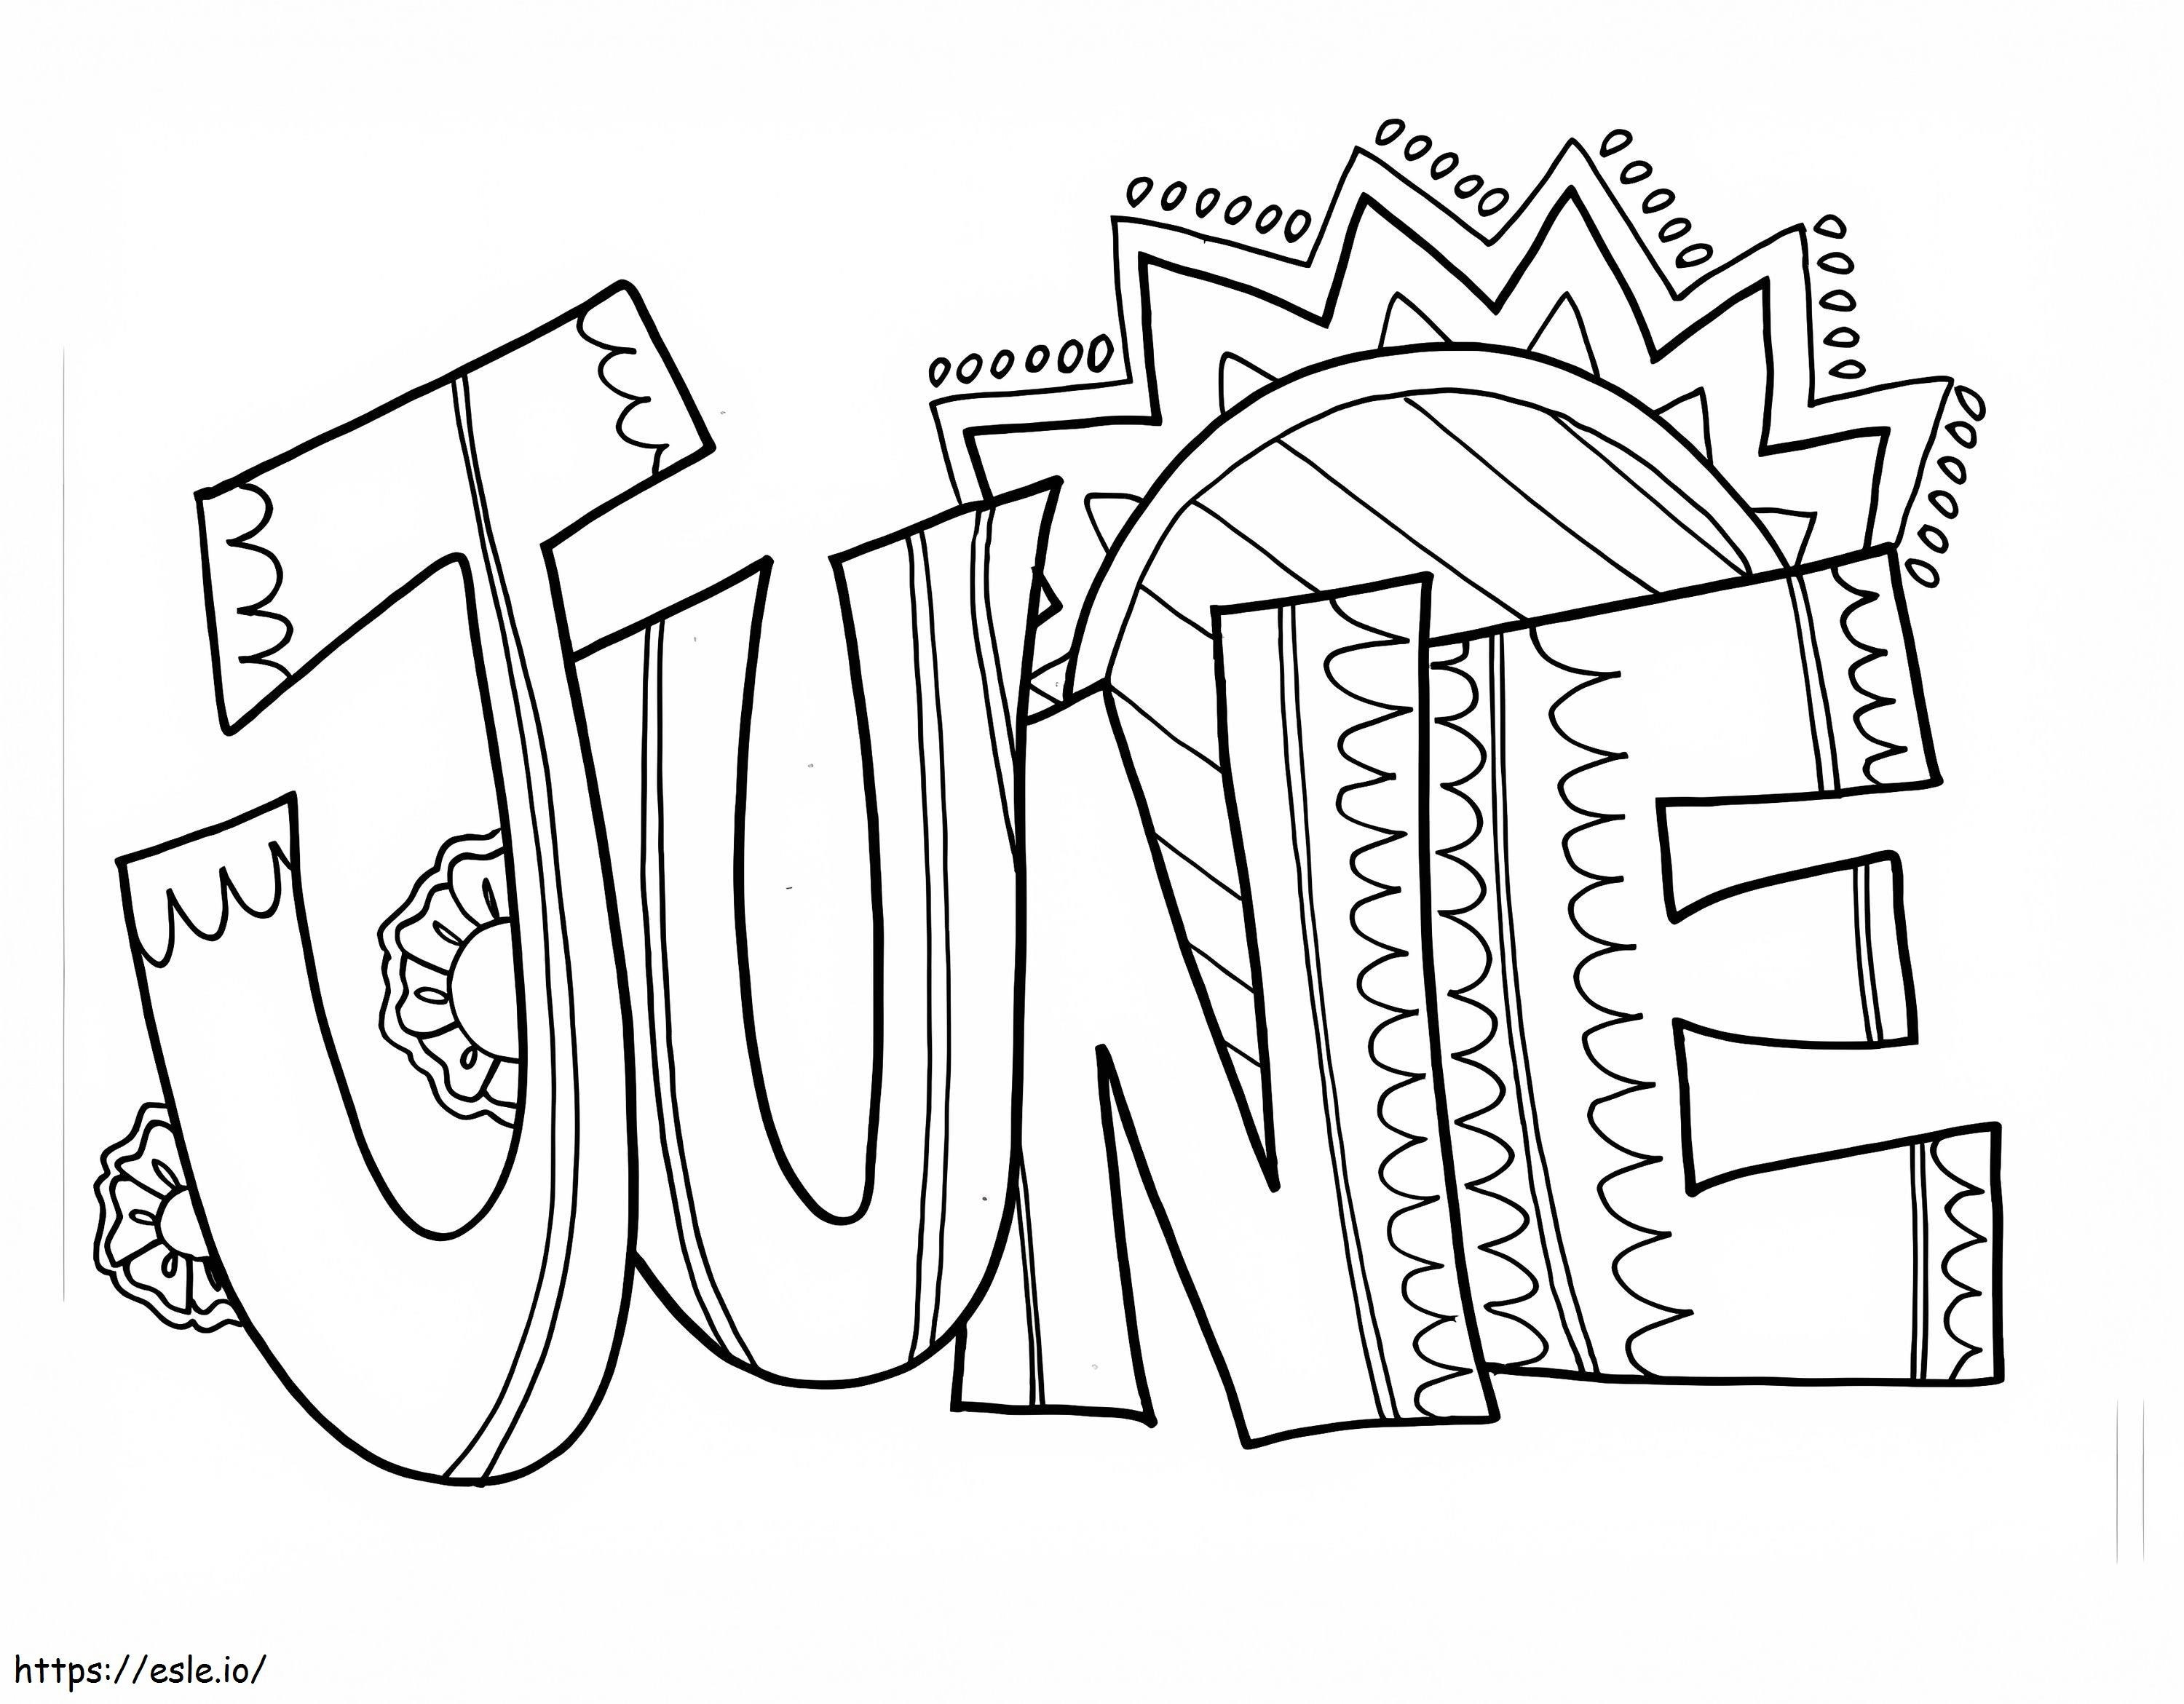 June 2 coloring page